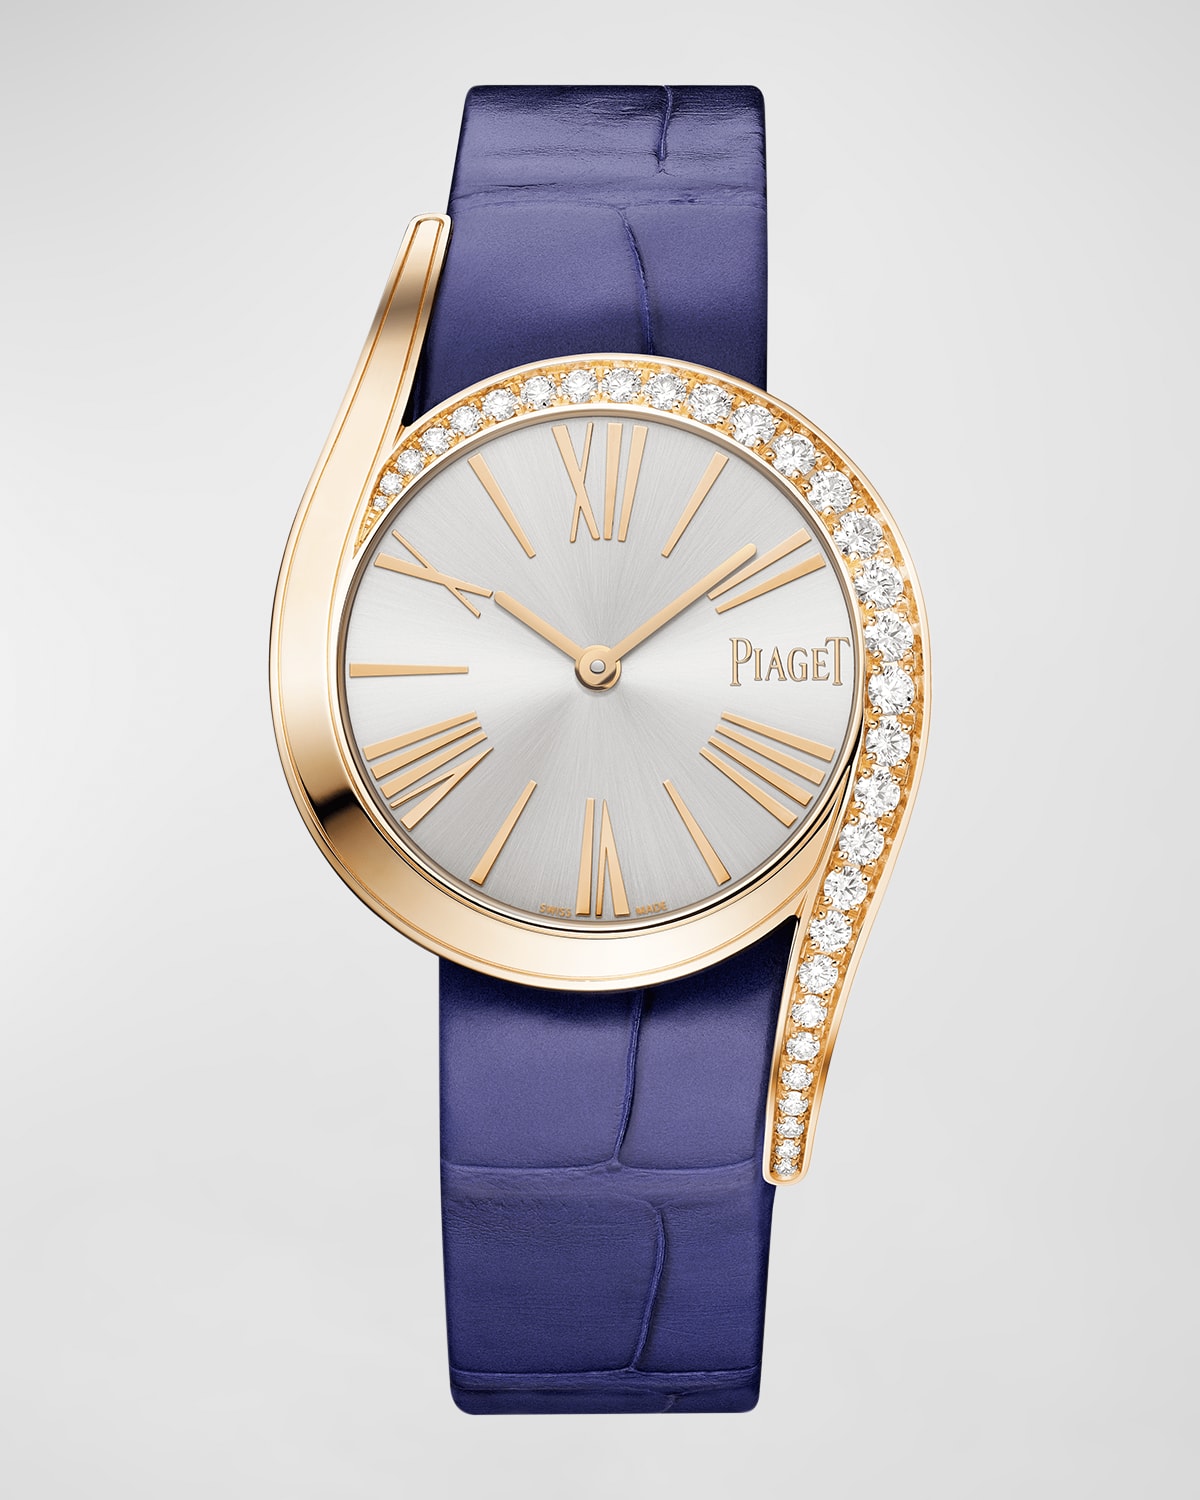 32mm Limelight Gala Rose Gold Diamond Watch with Alligator Strap, Blue